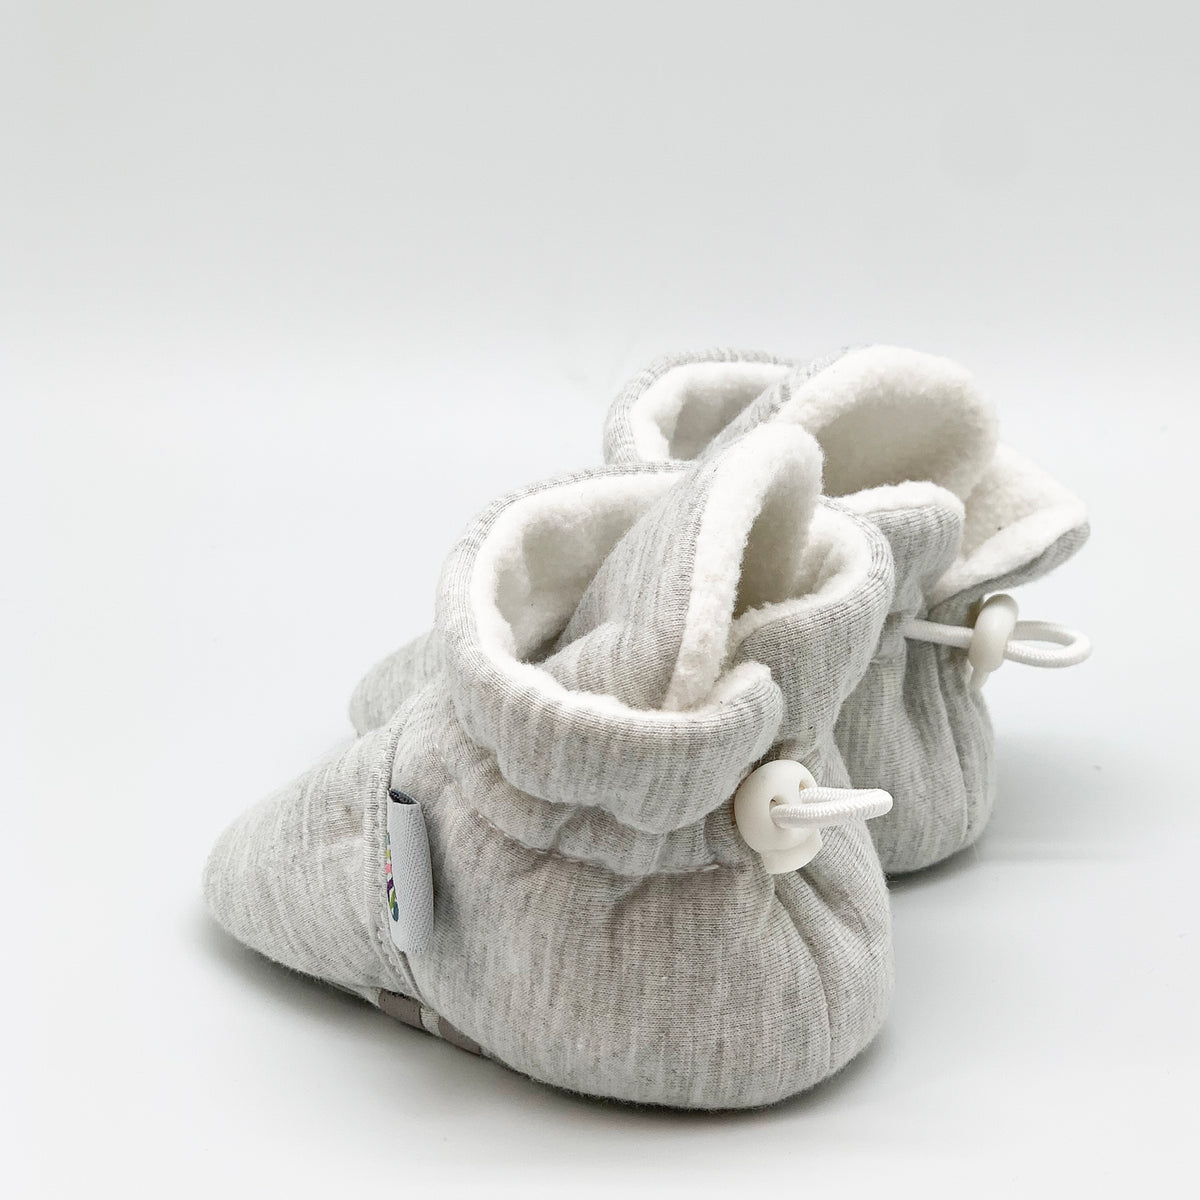 Stay-on, Non-Slip Bootie - Perfect pram Slipper or Baby Carrier boot - Grey